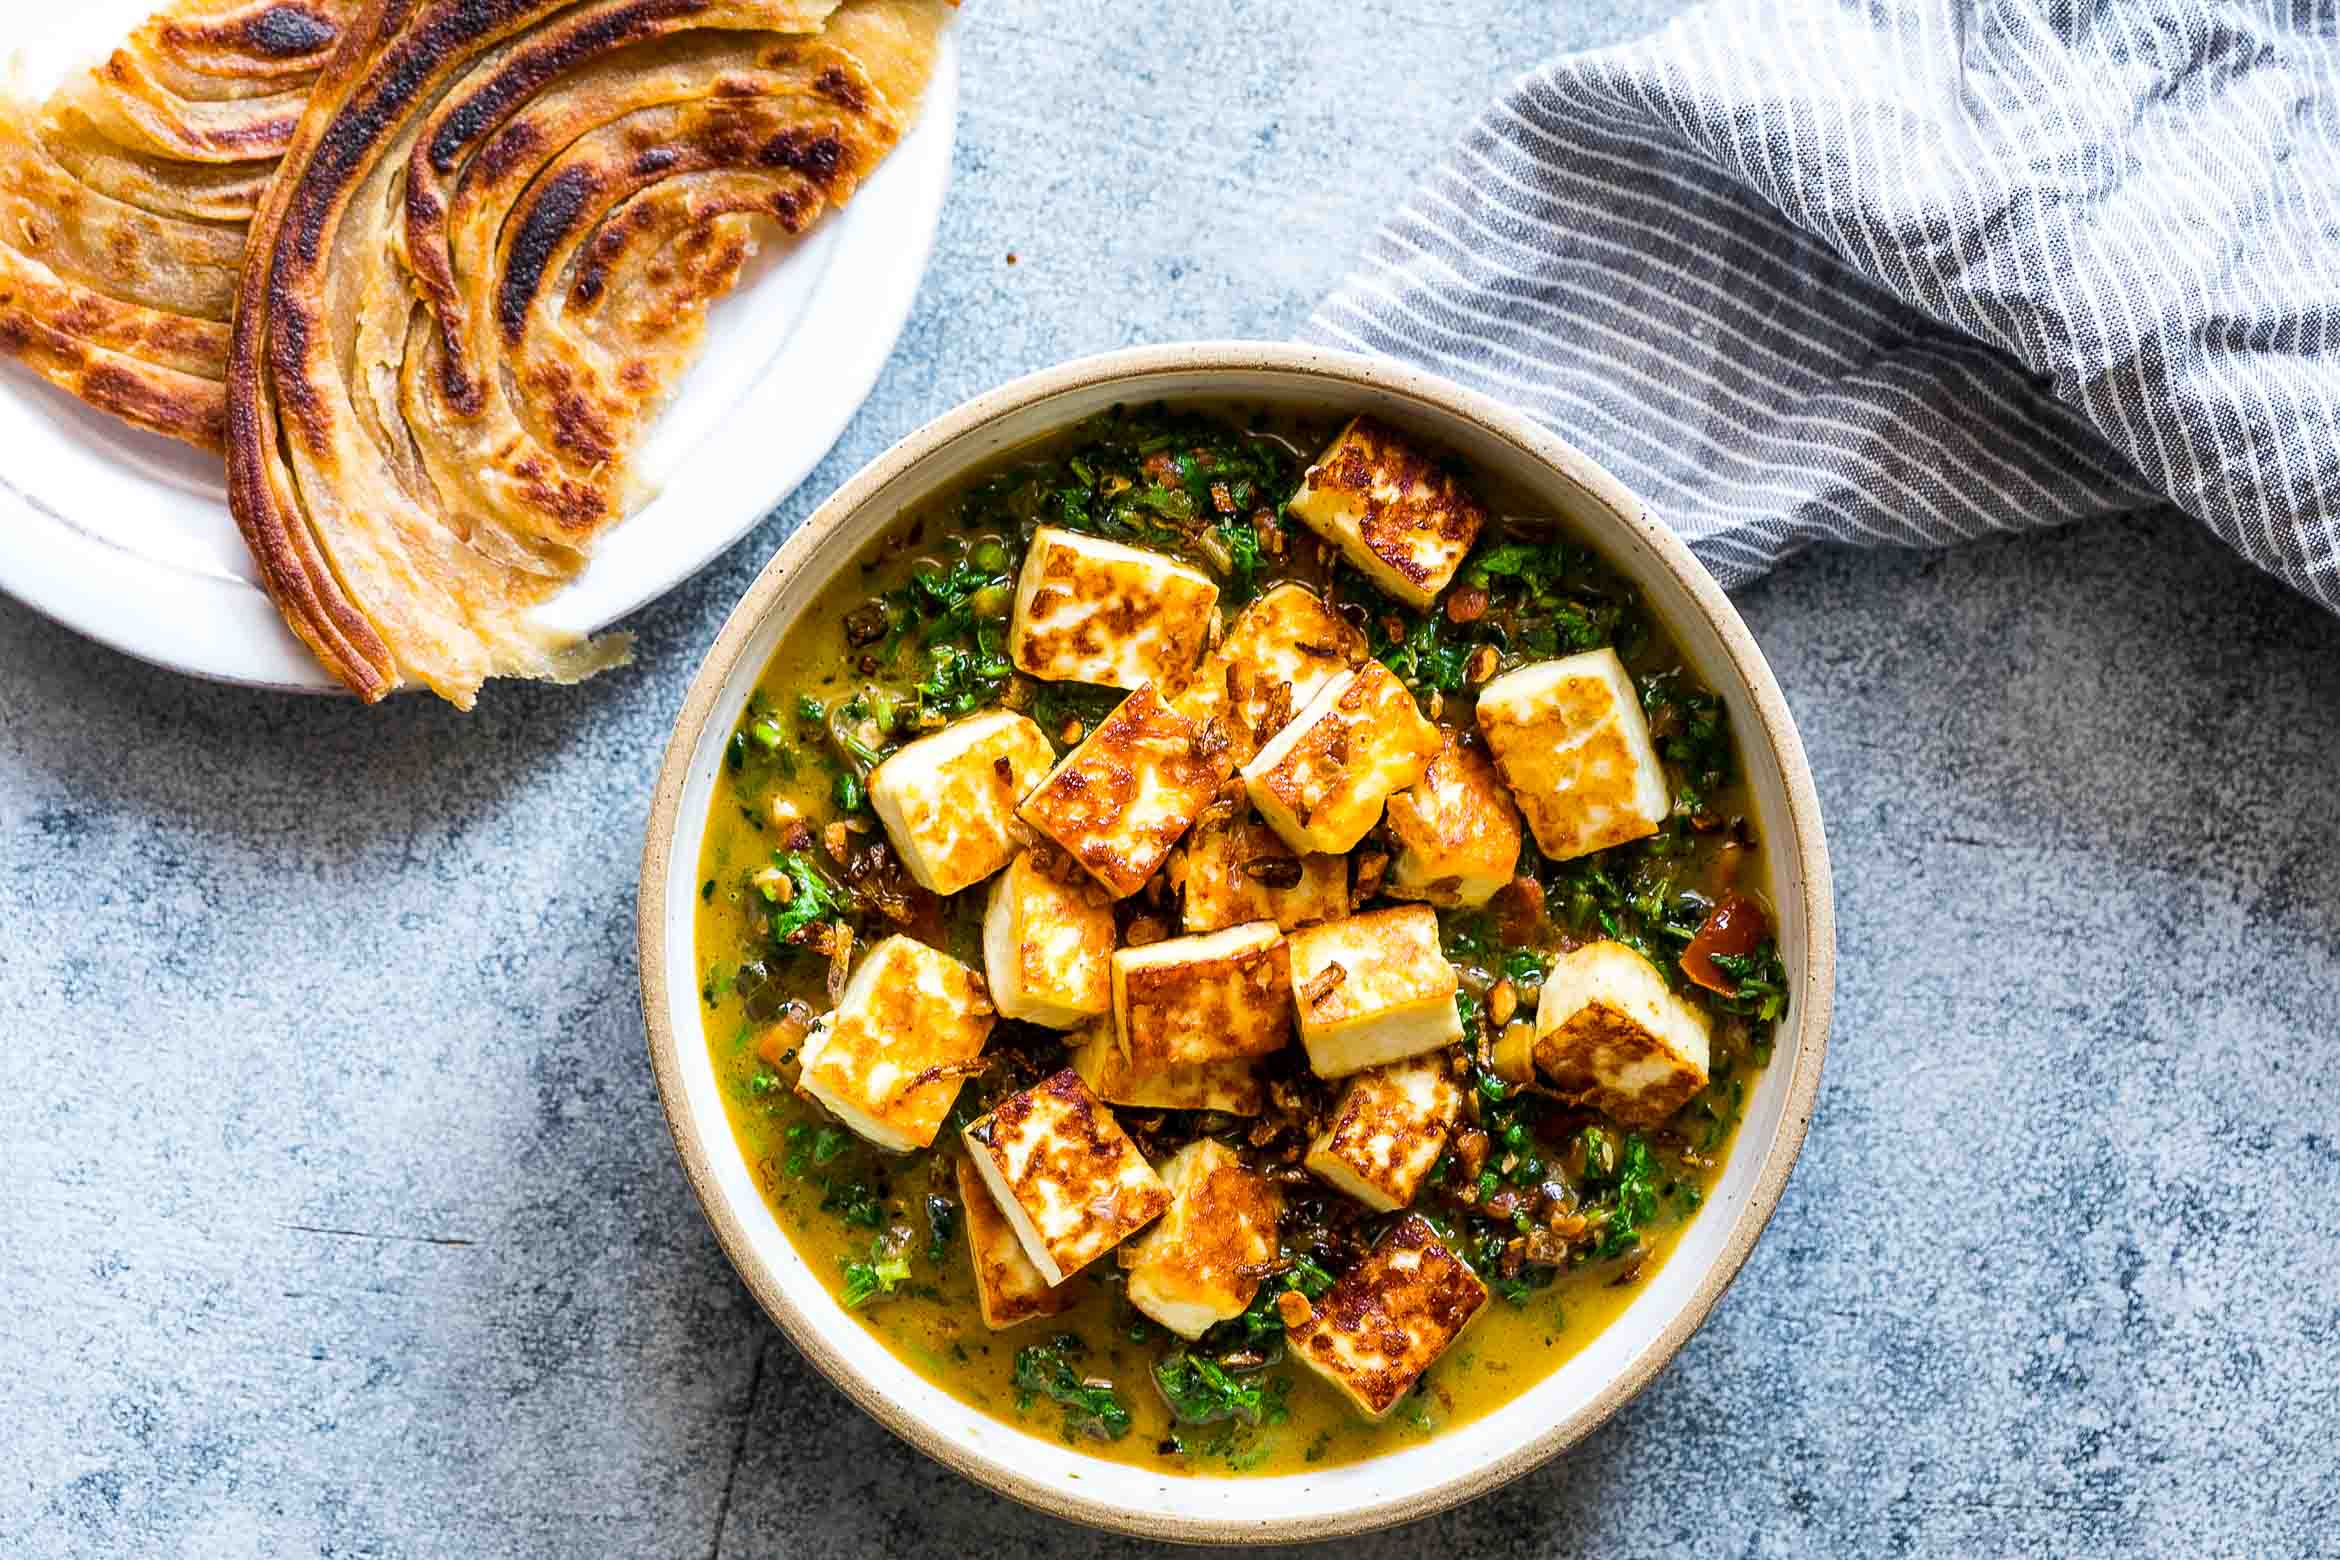 This healthy saag paneer is an easy, Indian recipe thats full of flavour and uses mustard greens or arugula and spinach. Gluten free & ready in 30 minutes.